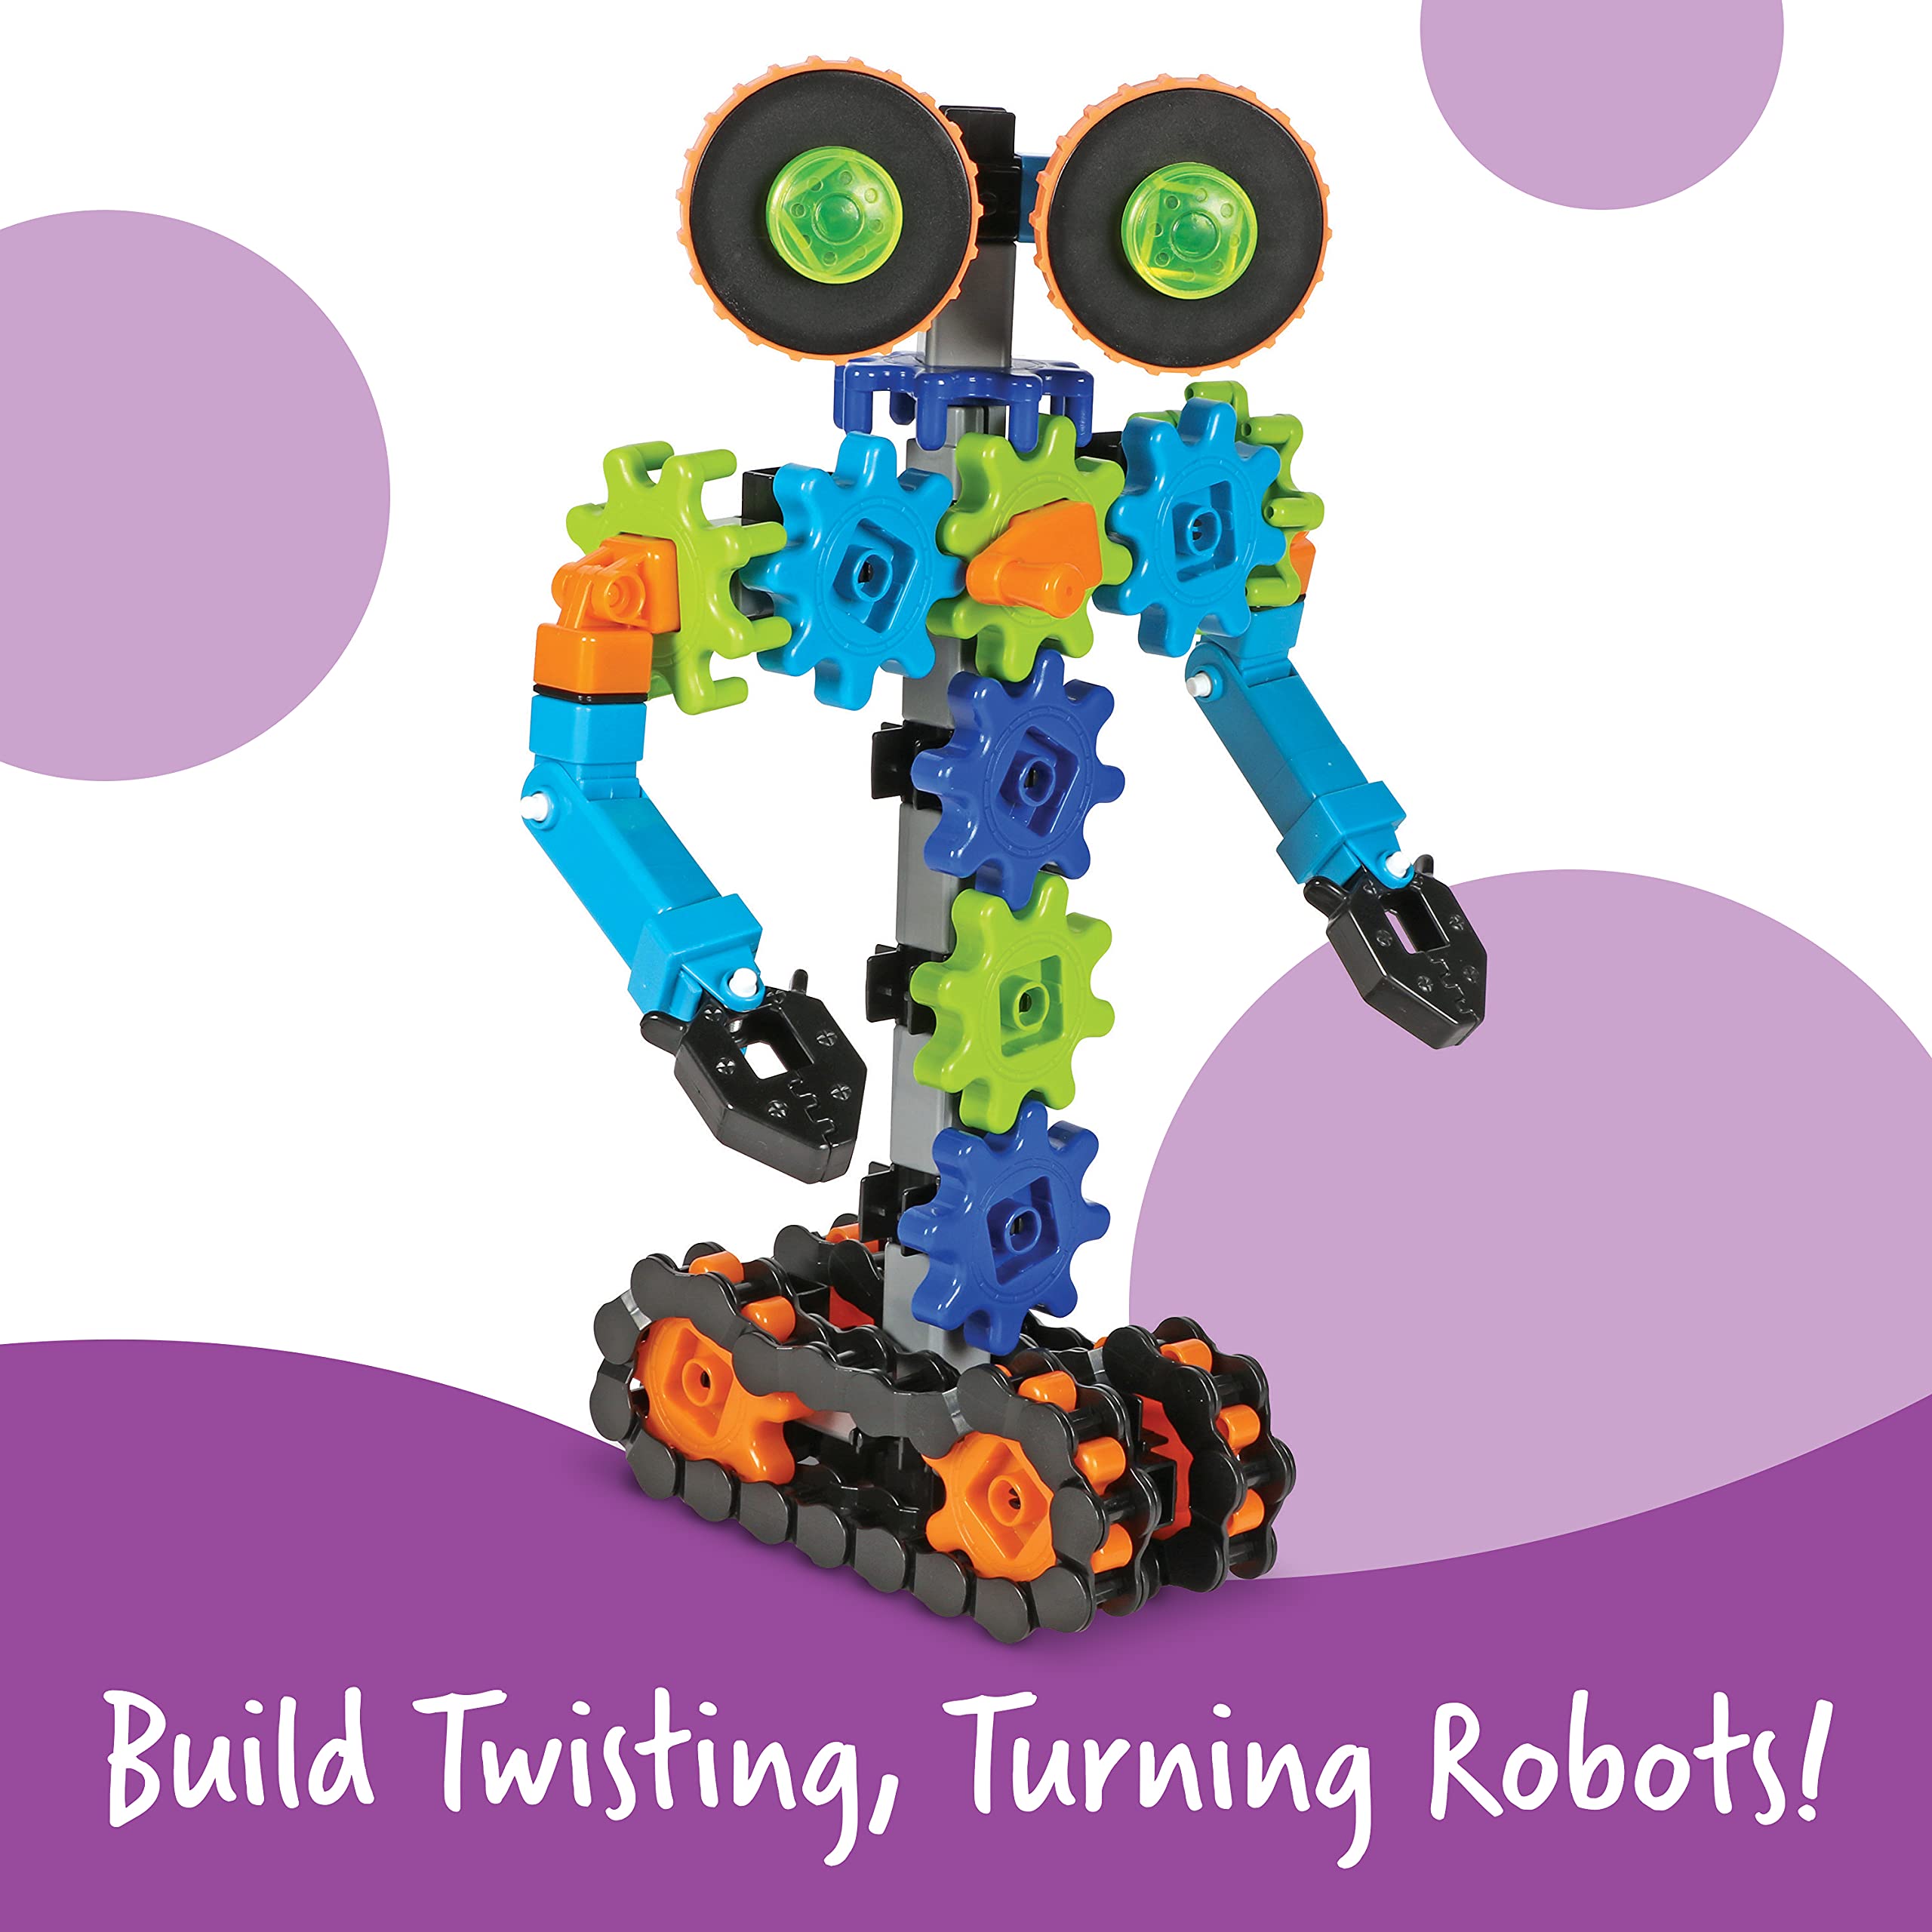 Learning Resources Gears! Gears! Gears! Robots in Motion Building Set - 116 Pieces, Ages 5+, Robot Toy, STEM Toys for Kids, Robots for Kids, Back to School Gifts